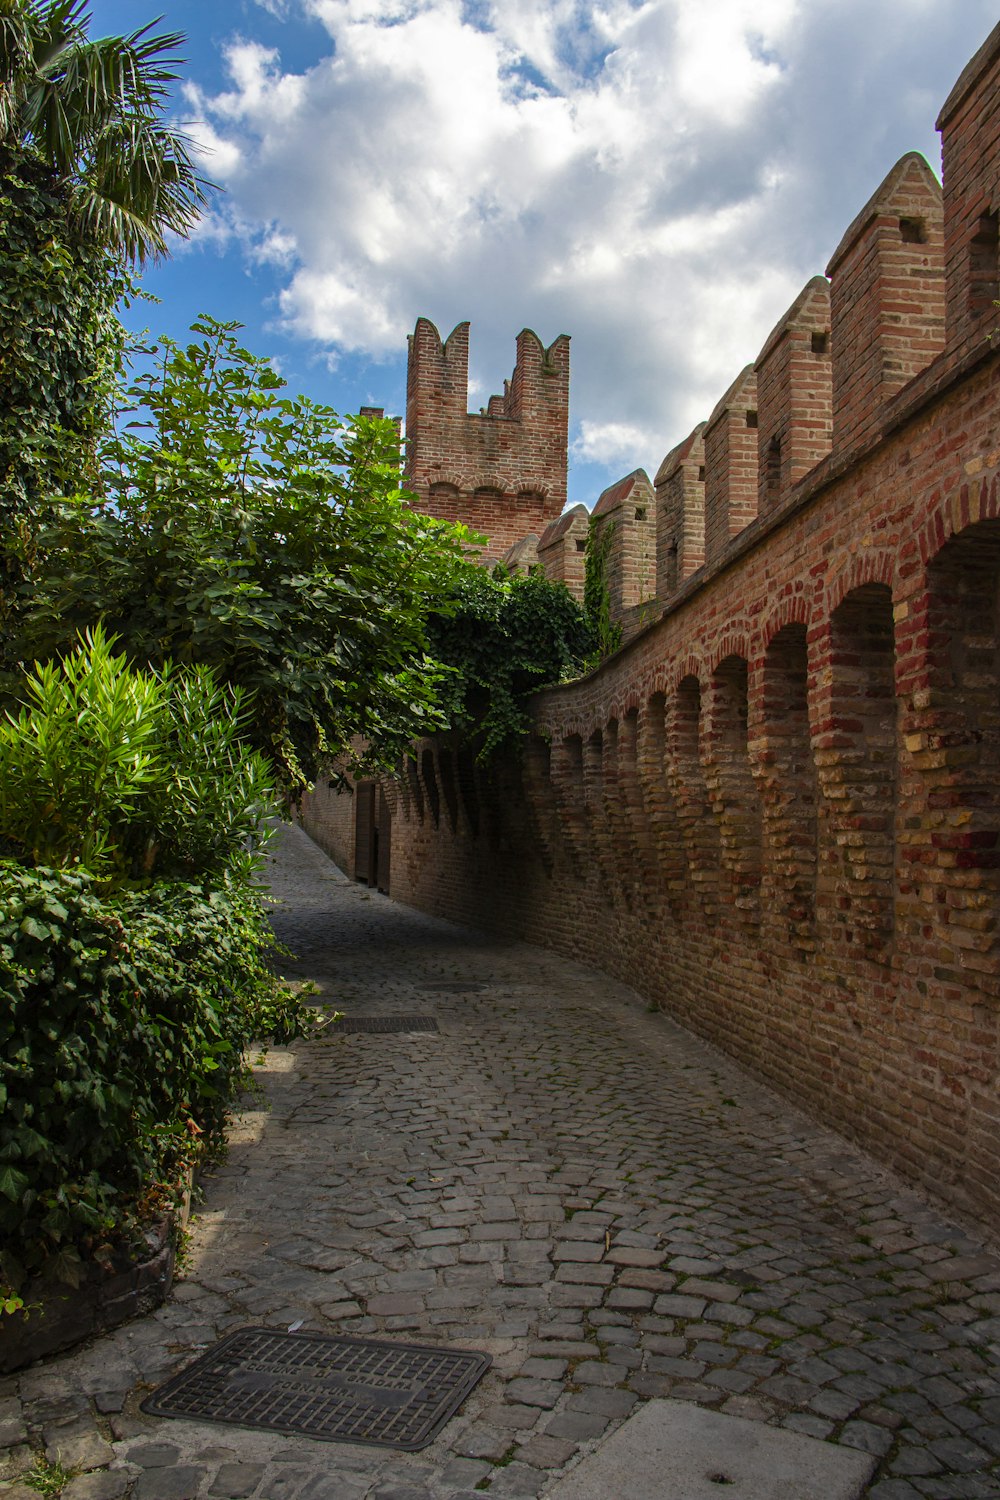 a cobblestone street lined with trees and bushes